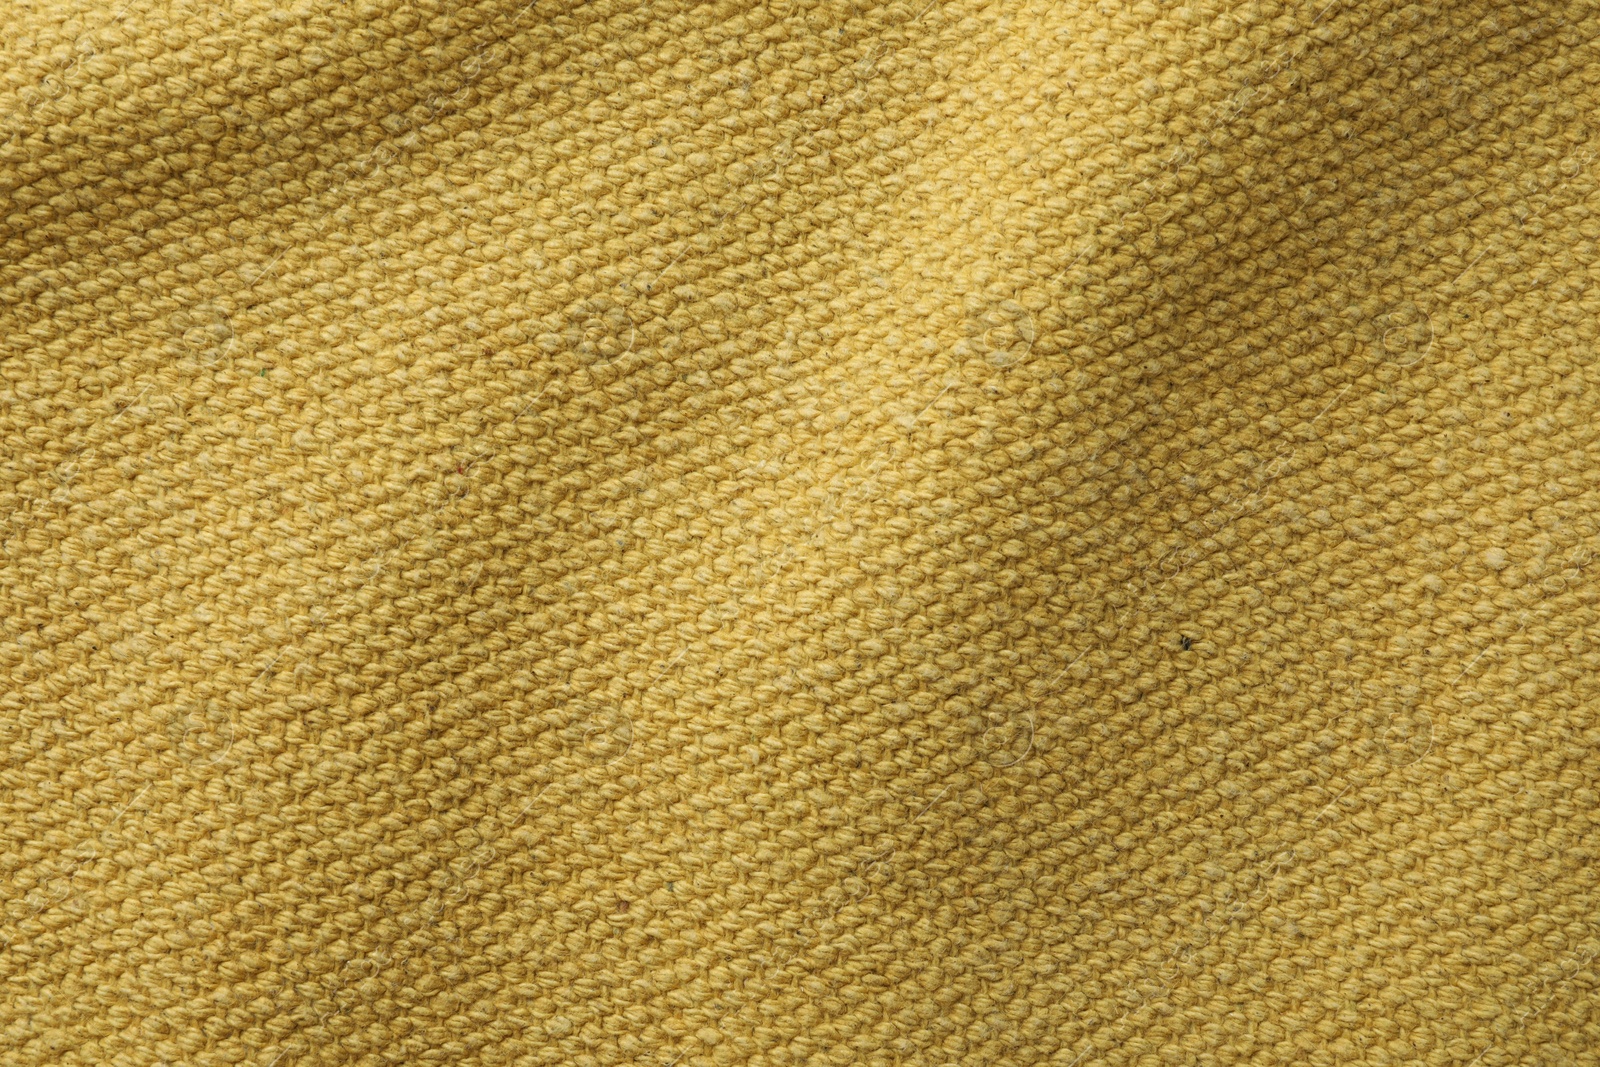 Photo of Texture of golden color fabric as background, top view